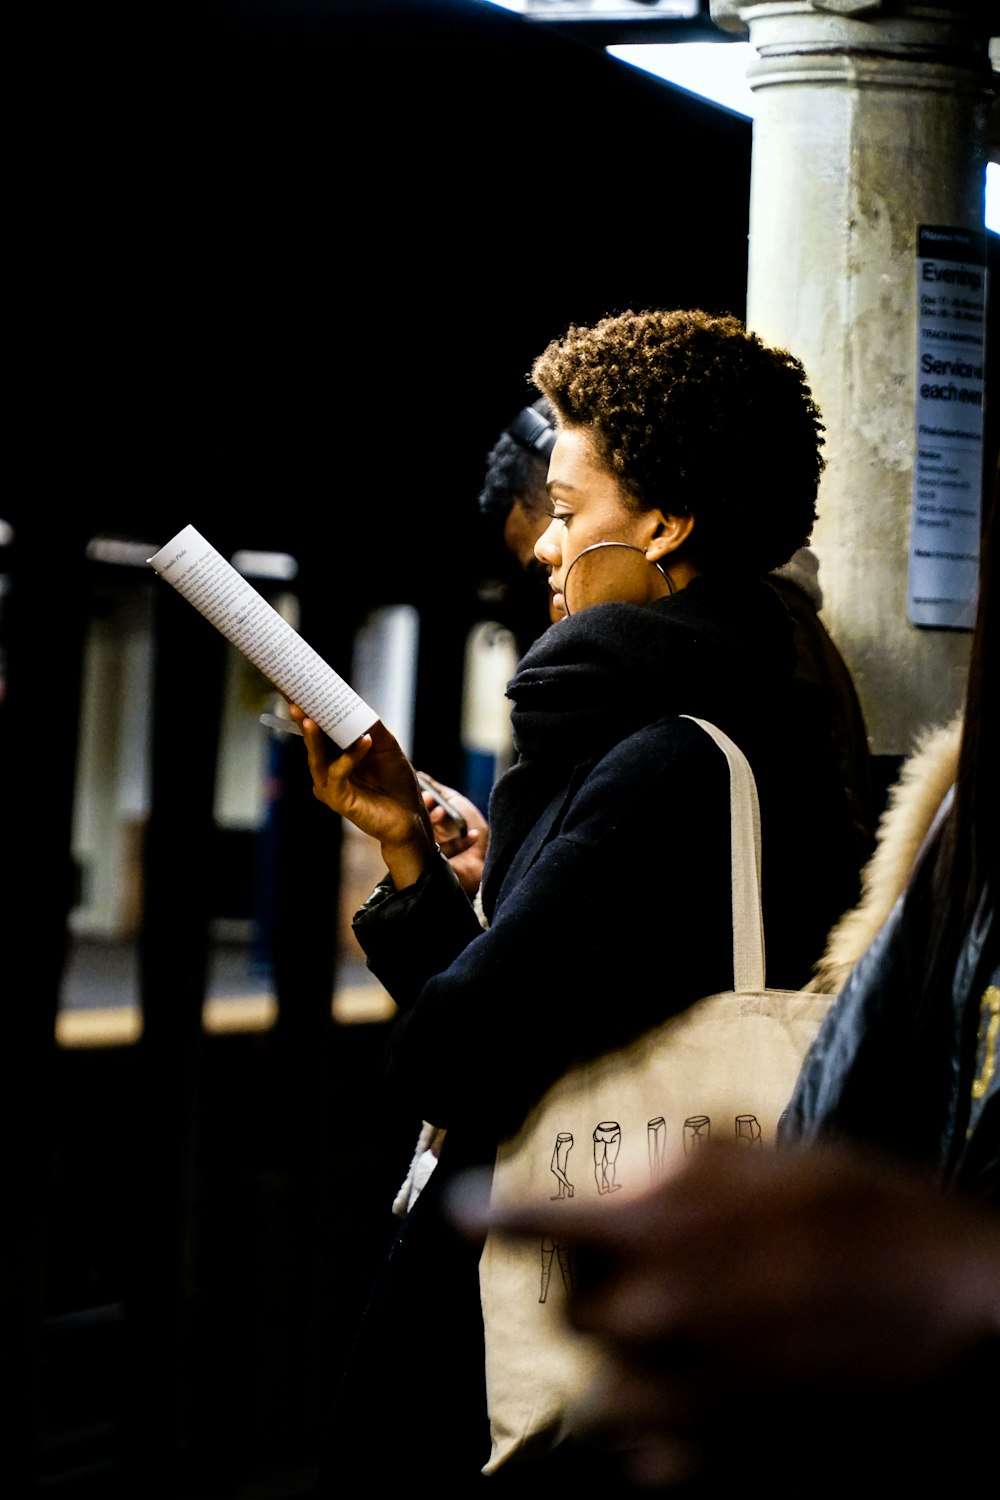 woman reading book while waiting in a train station